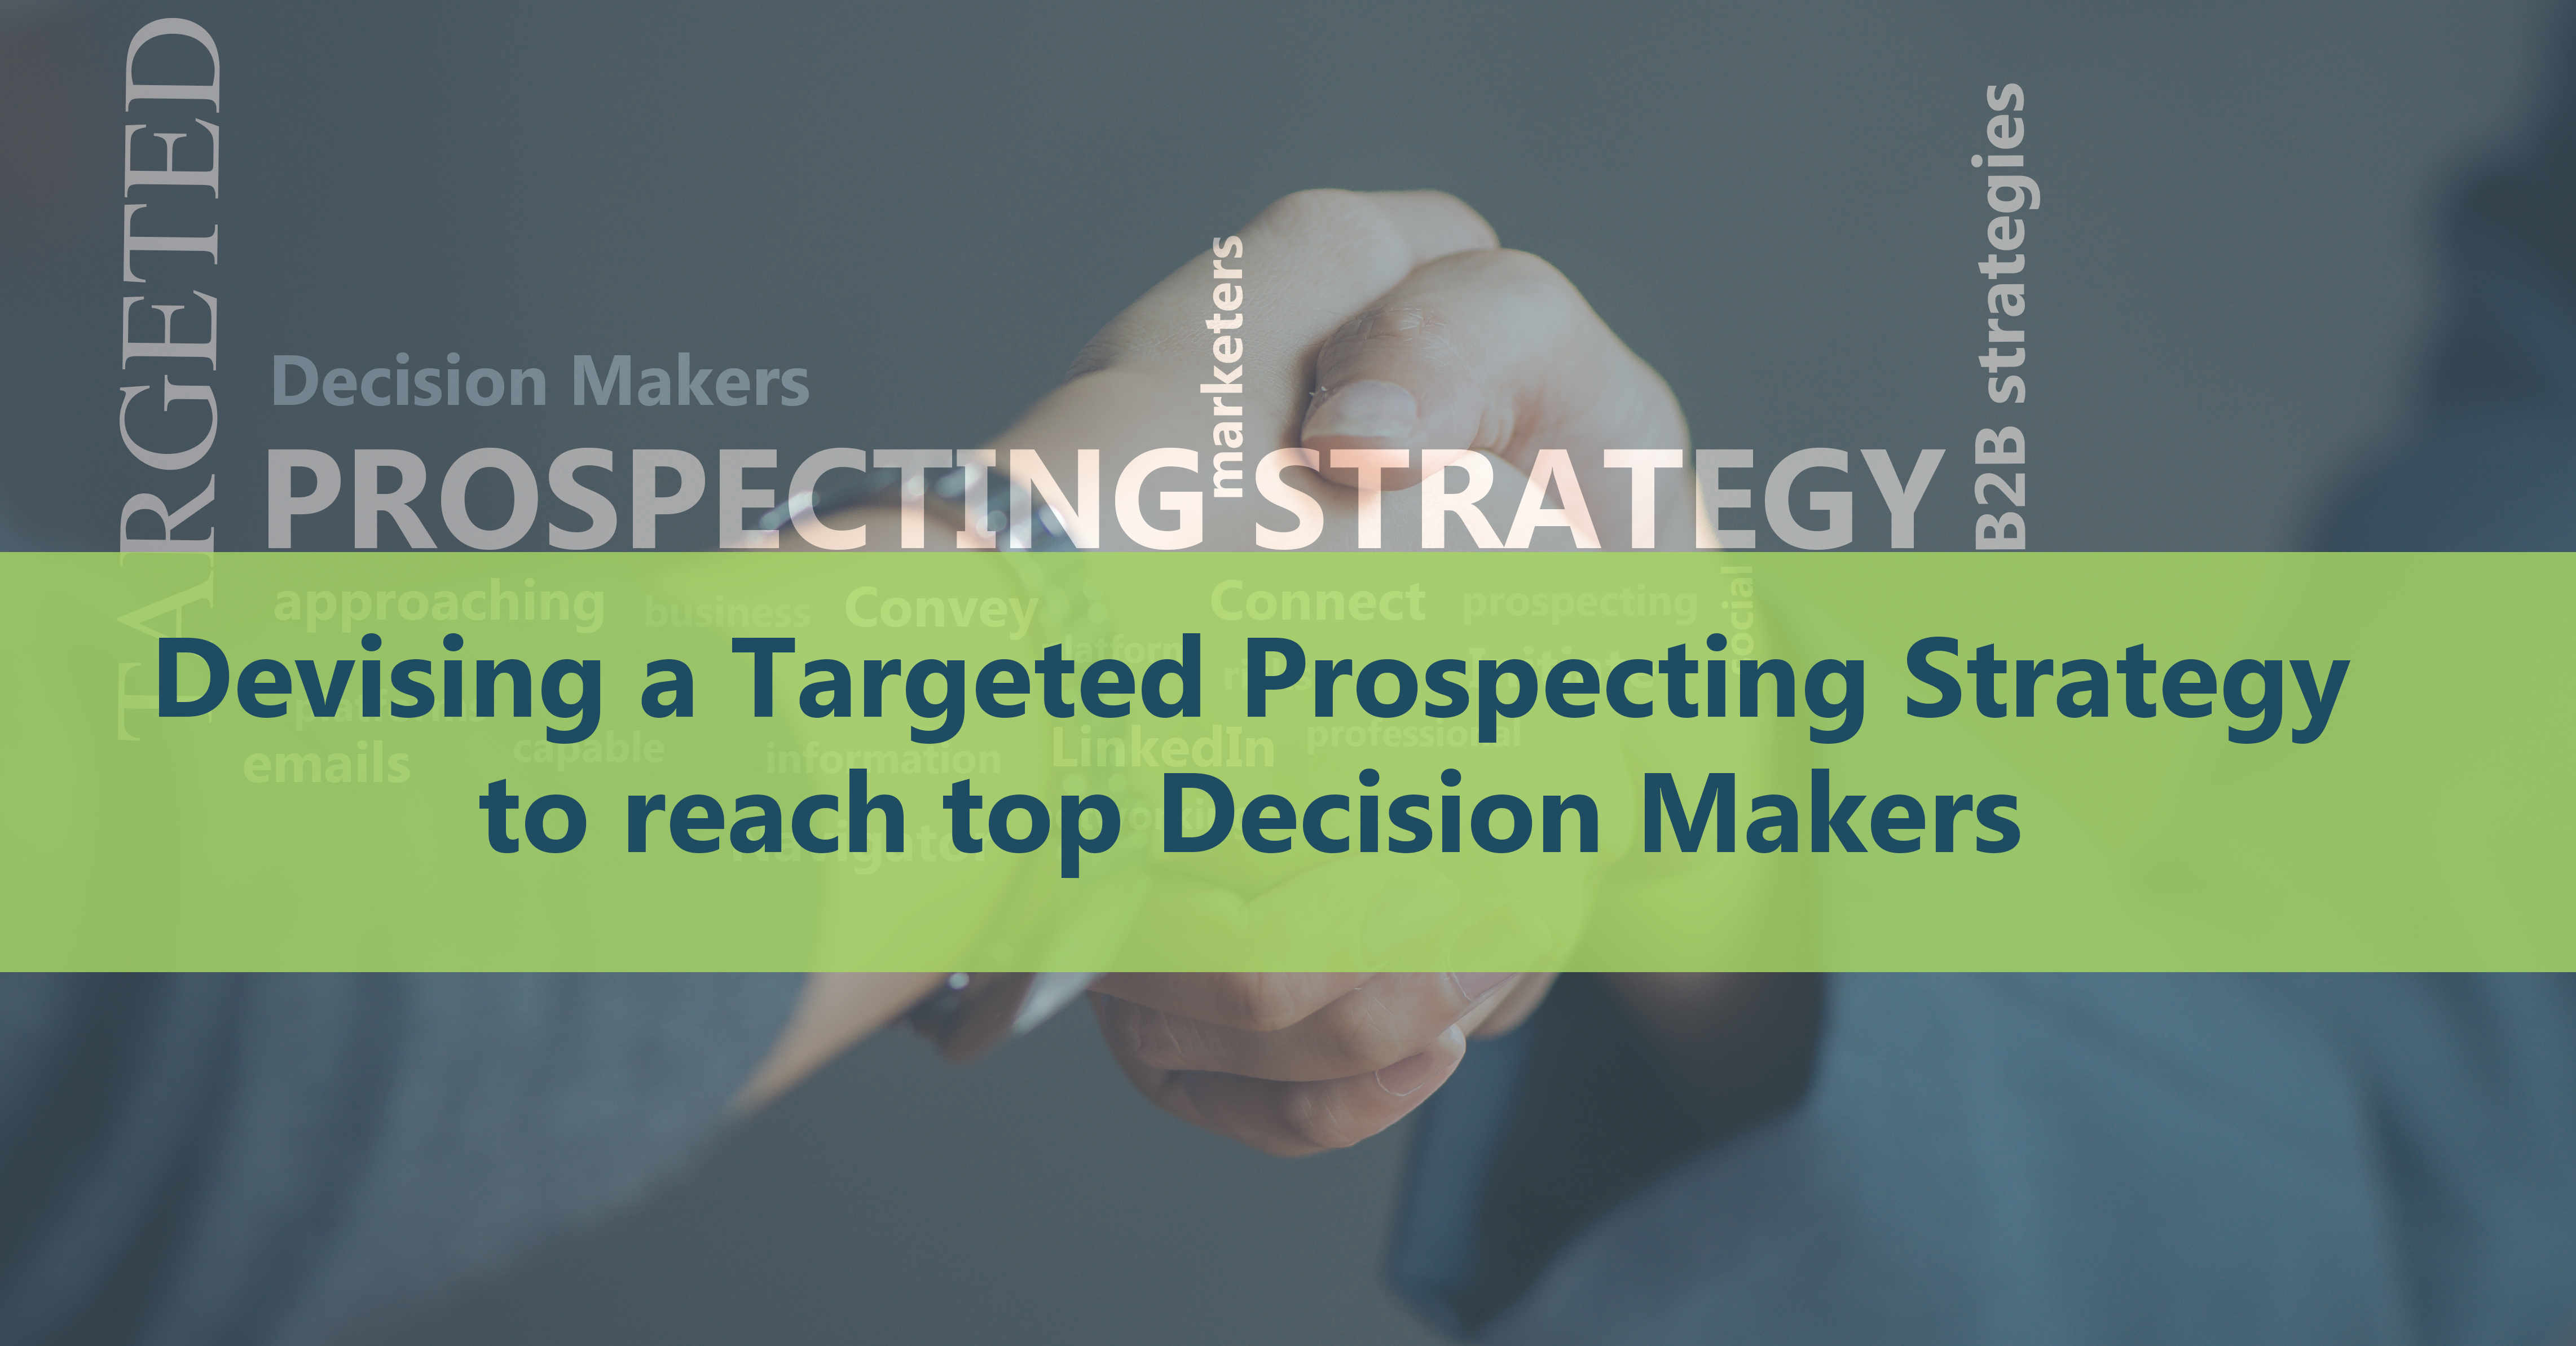 Devising a Targeted Prospecting Strategy to reach top Decision Makers